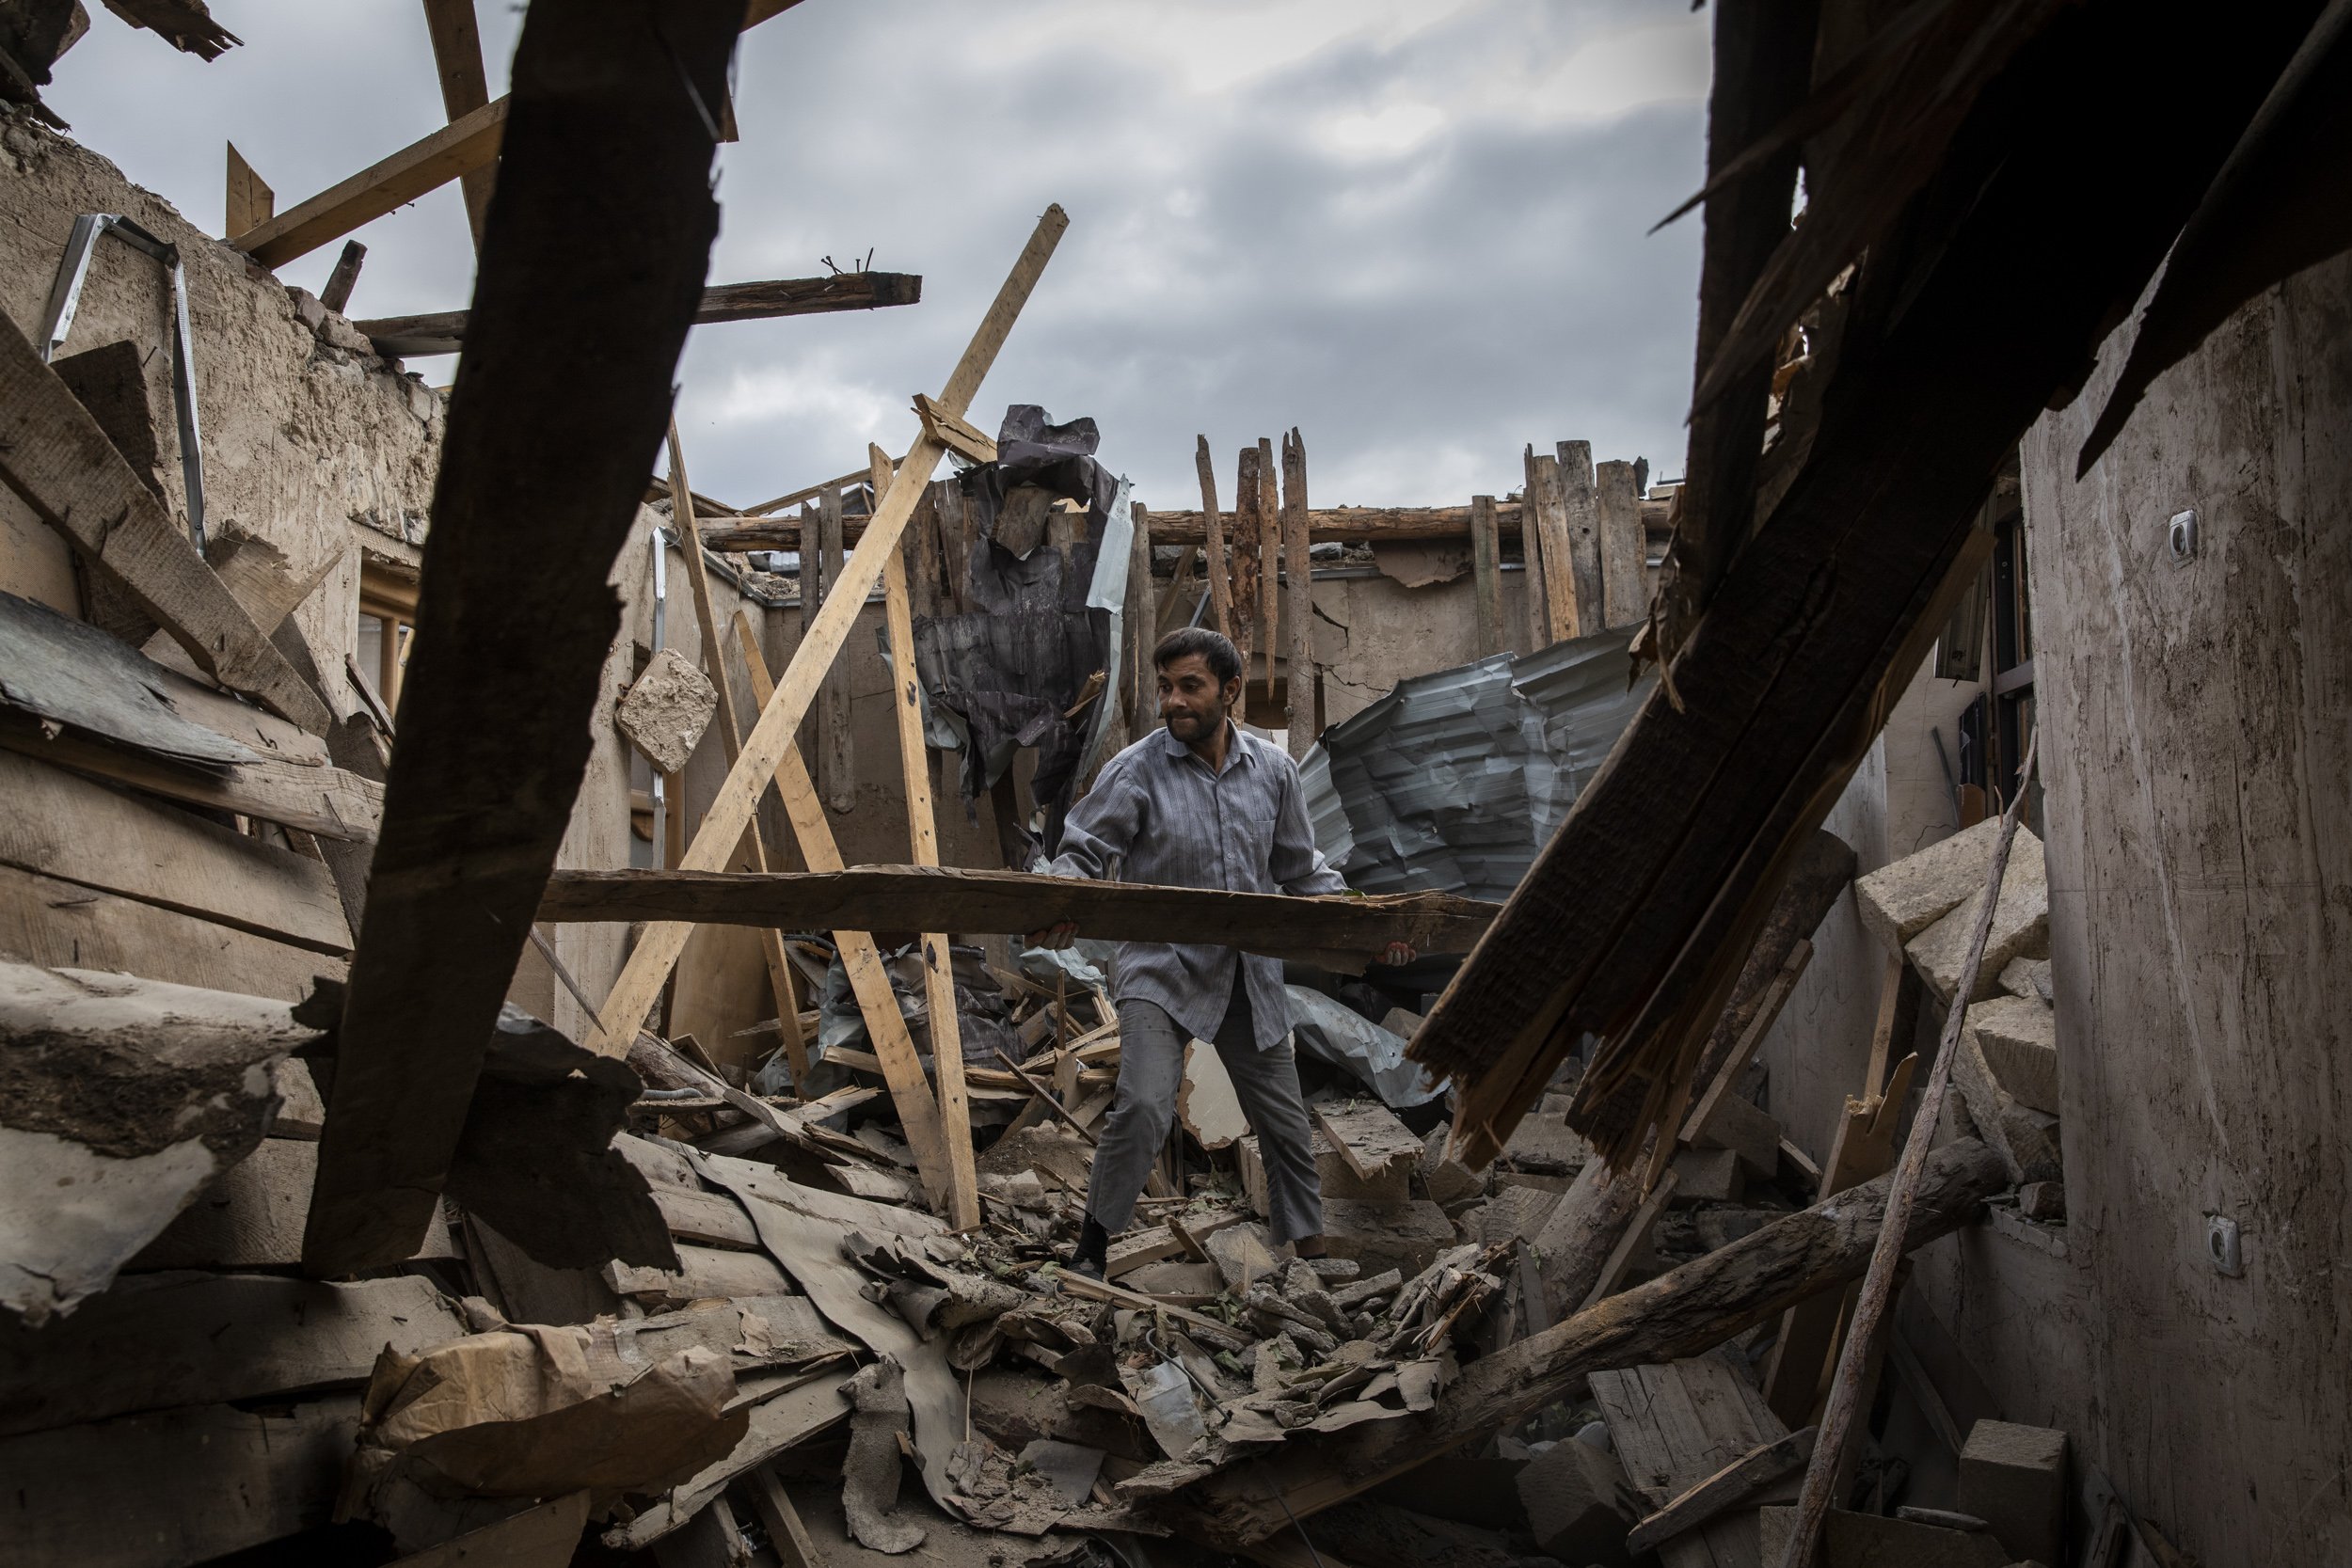  Ali Ibrahimov, 40, began to clear his destroyed home in the Cevathan neighbourhood&nbsp;of Ganja, Azerbaijan’s second largest city. The residential area was hit by a Scud missile fired by Armenian forces on the the 17th of October. The strike killed